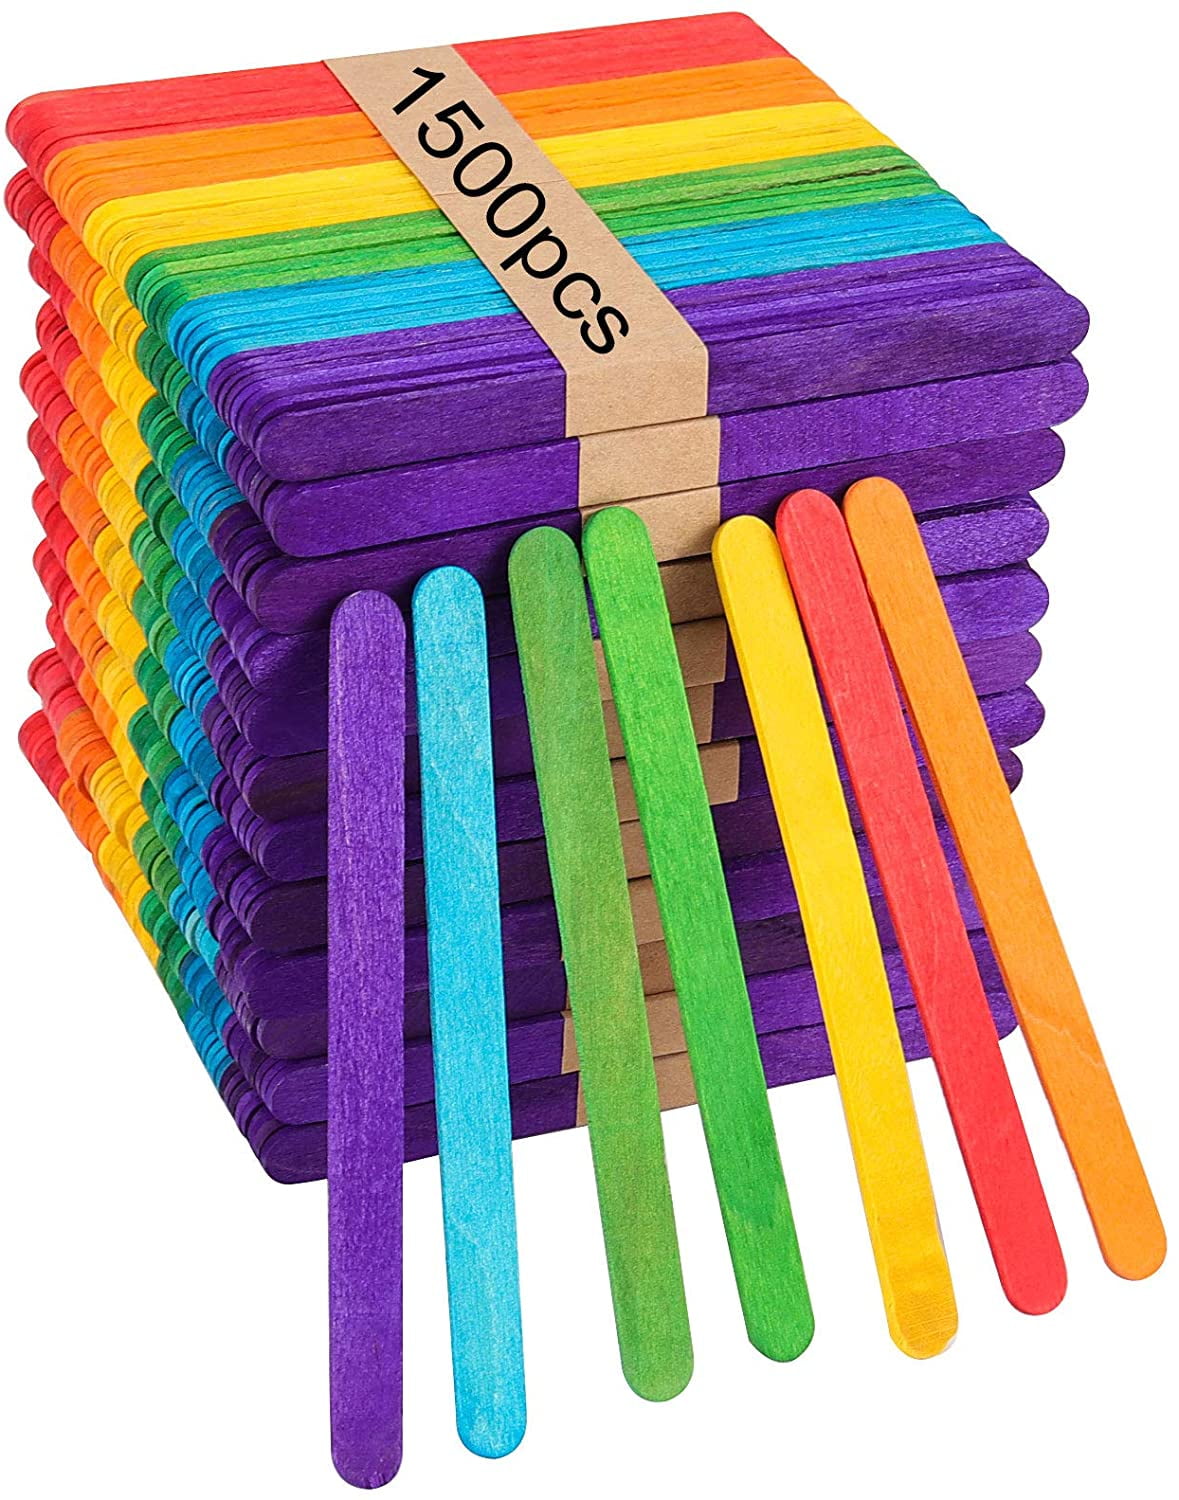 50pcs Colored Popsicle Sticks Natural Wood Craft Sticks Sticks Jumbo  Lollipop Sticks with Holes for Hand Craft Projects